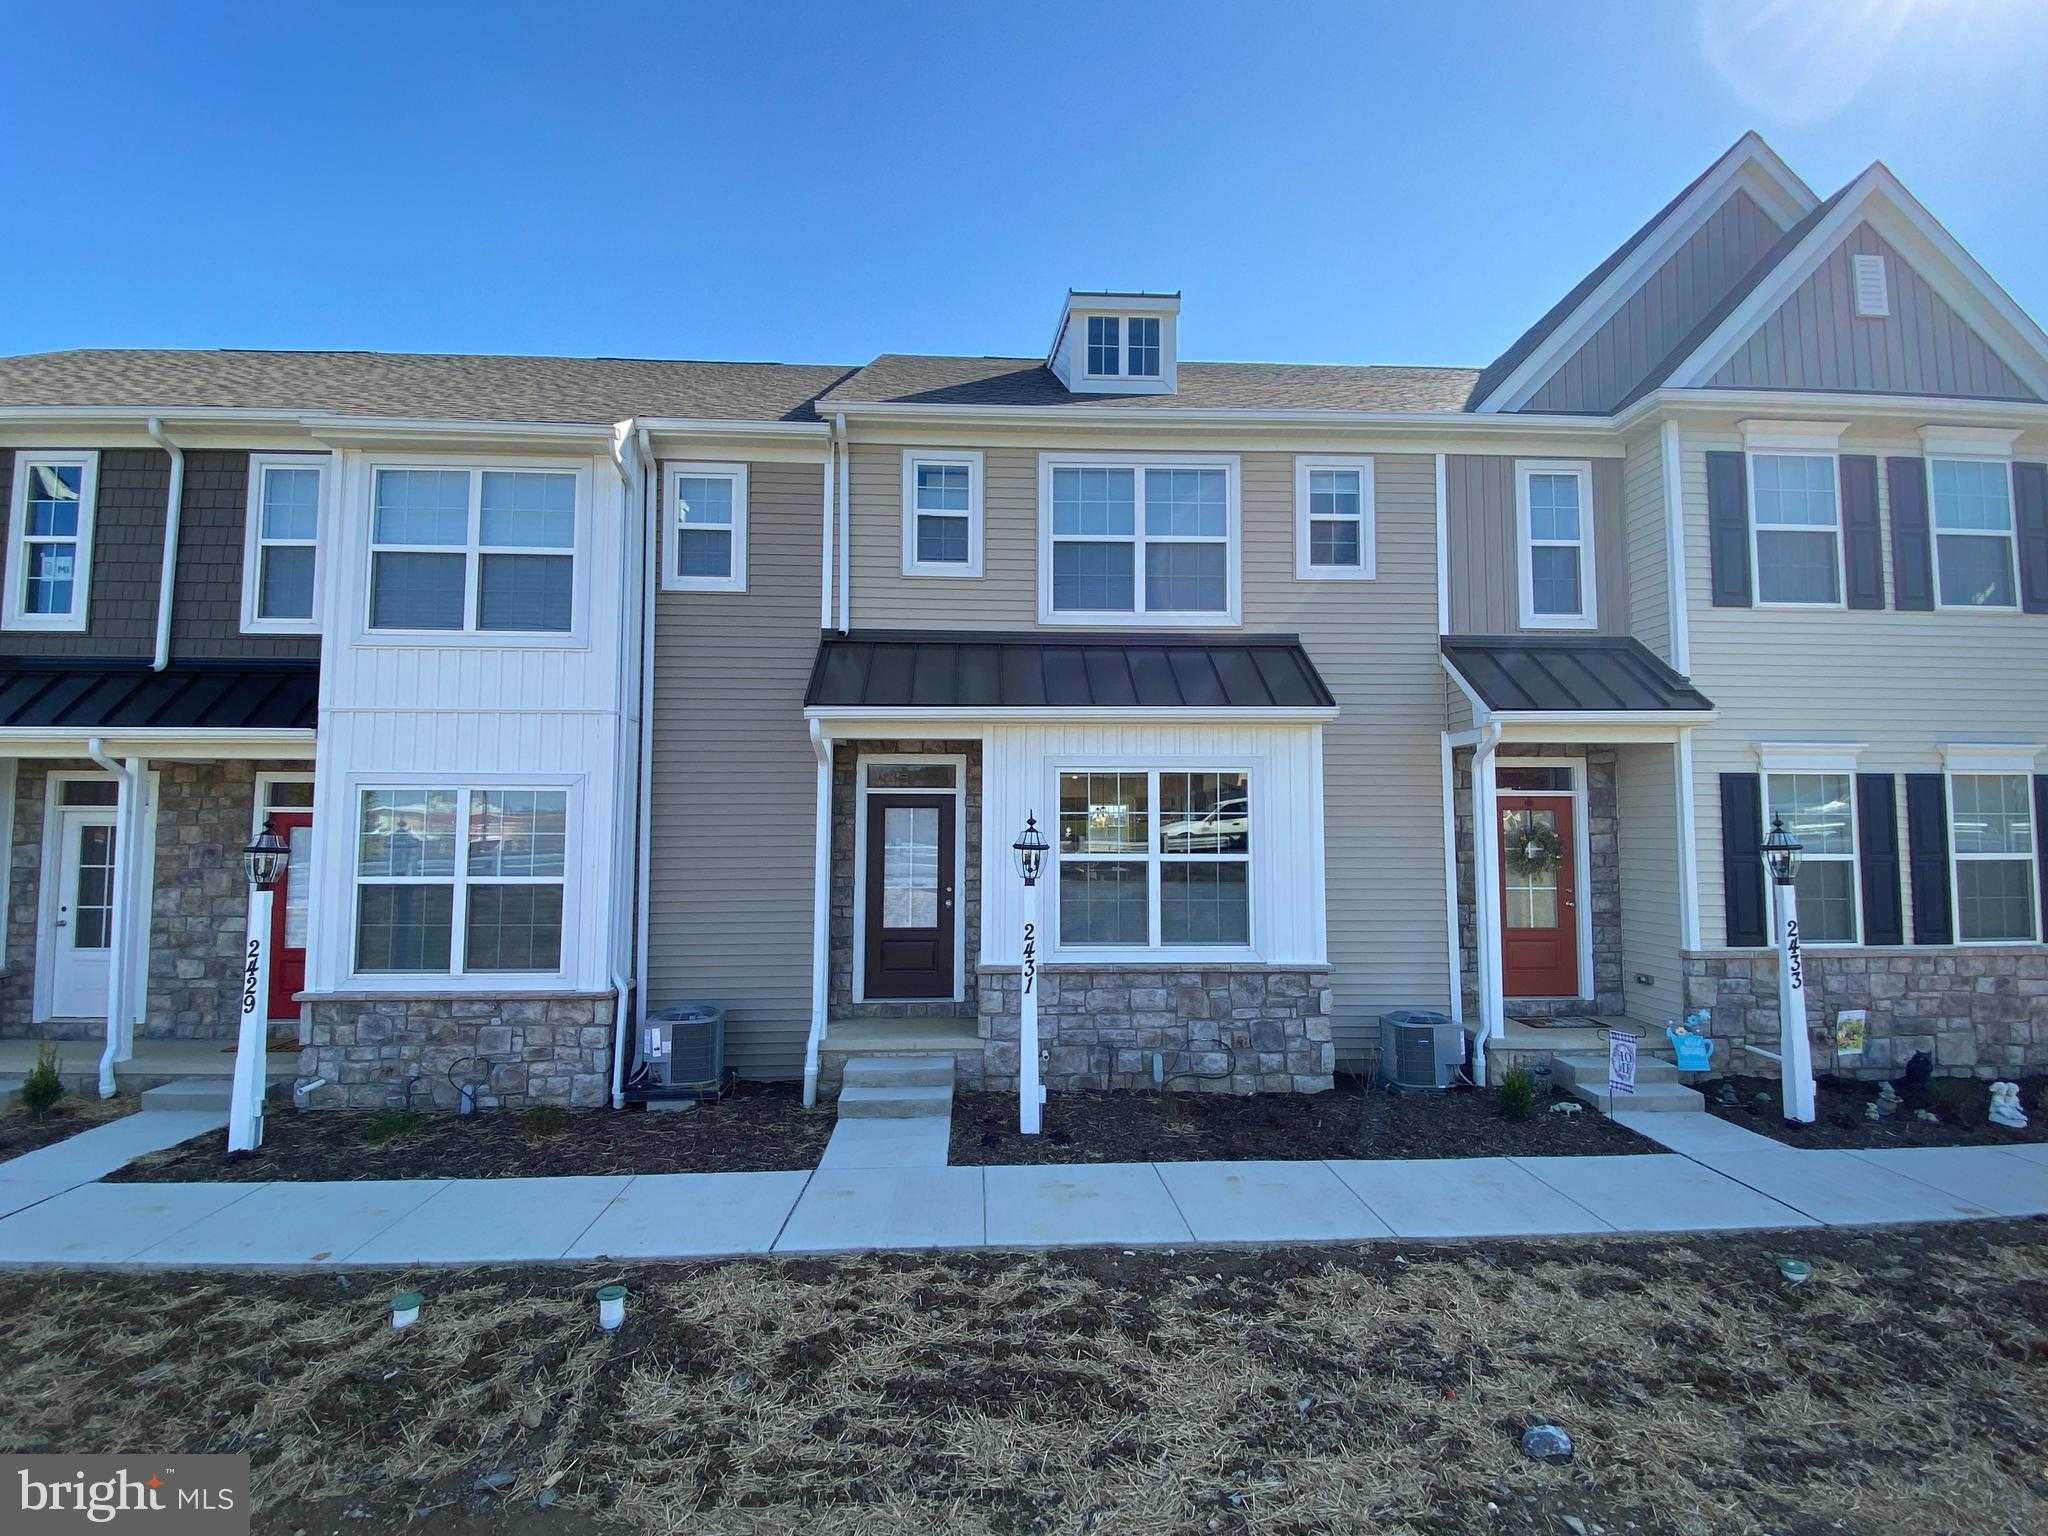 View LANCASTER, PA 17601 townhome